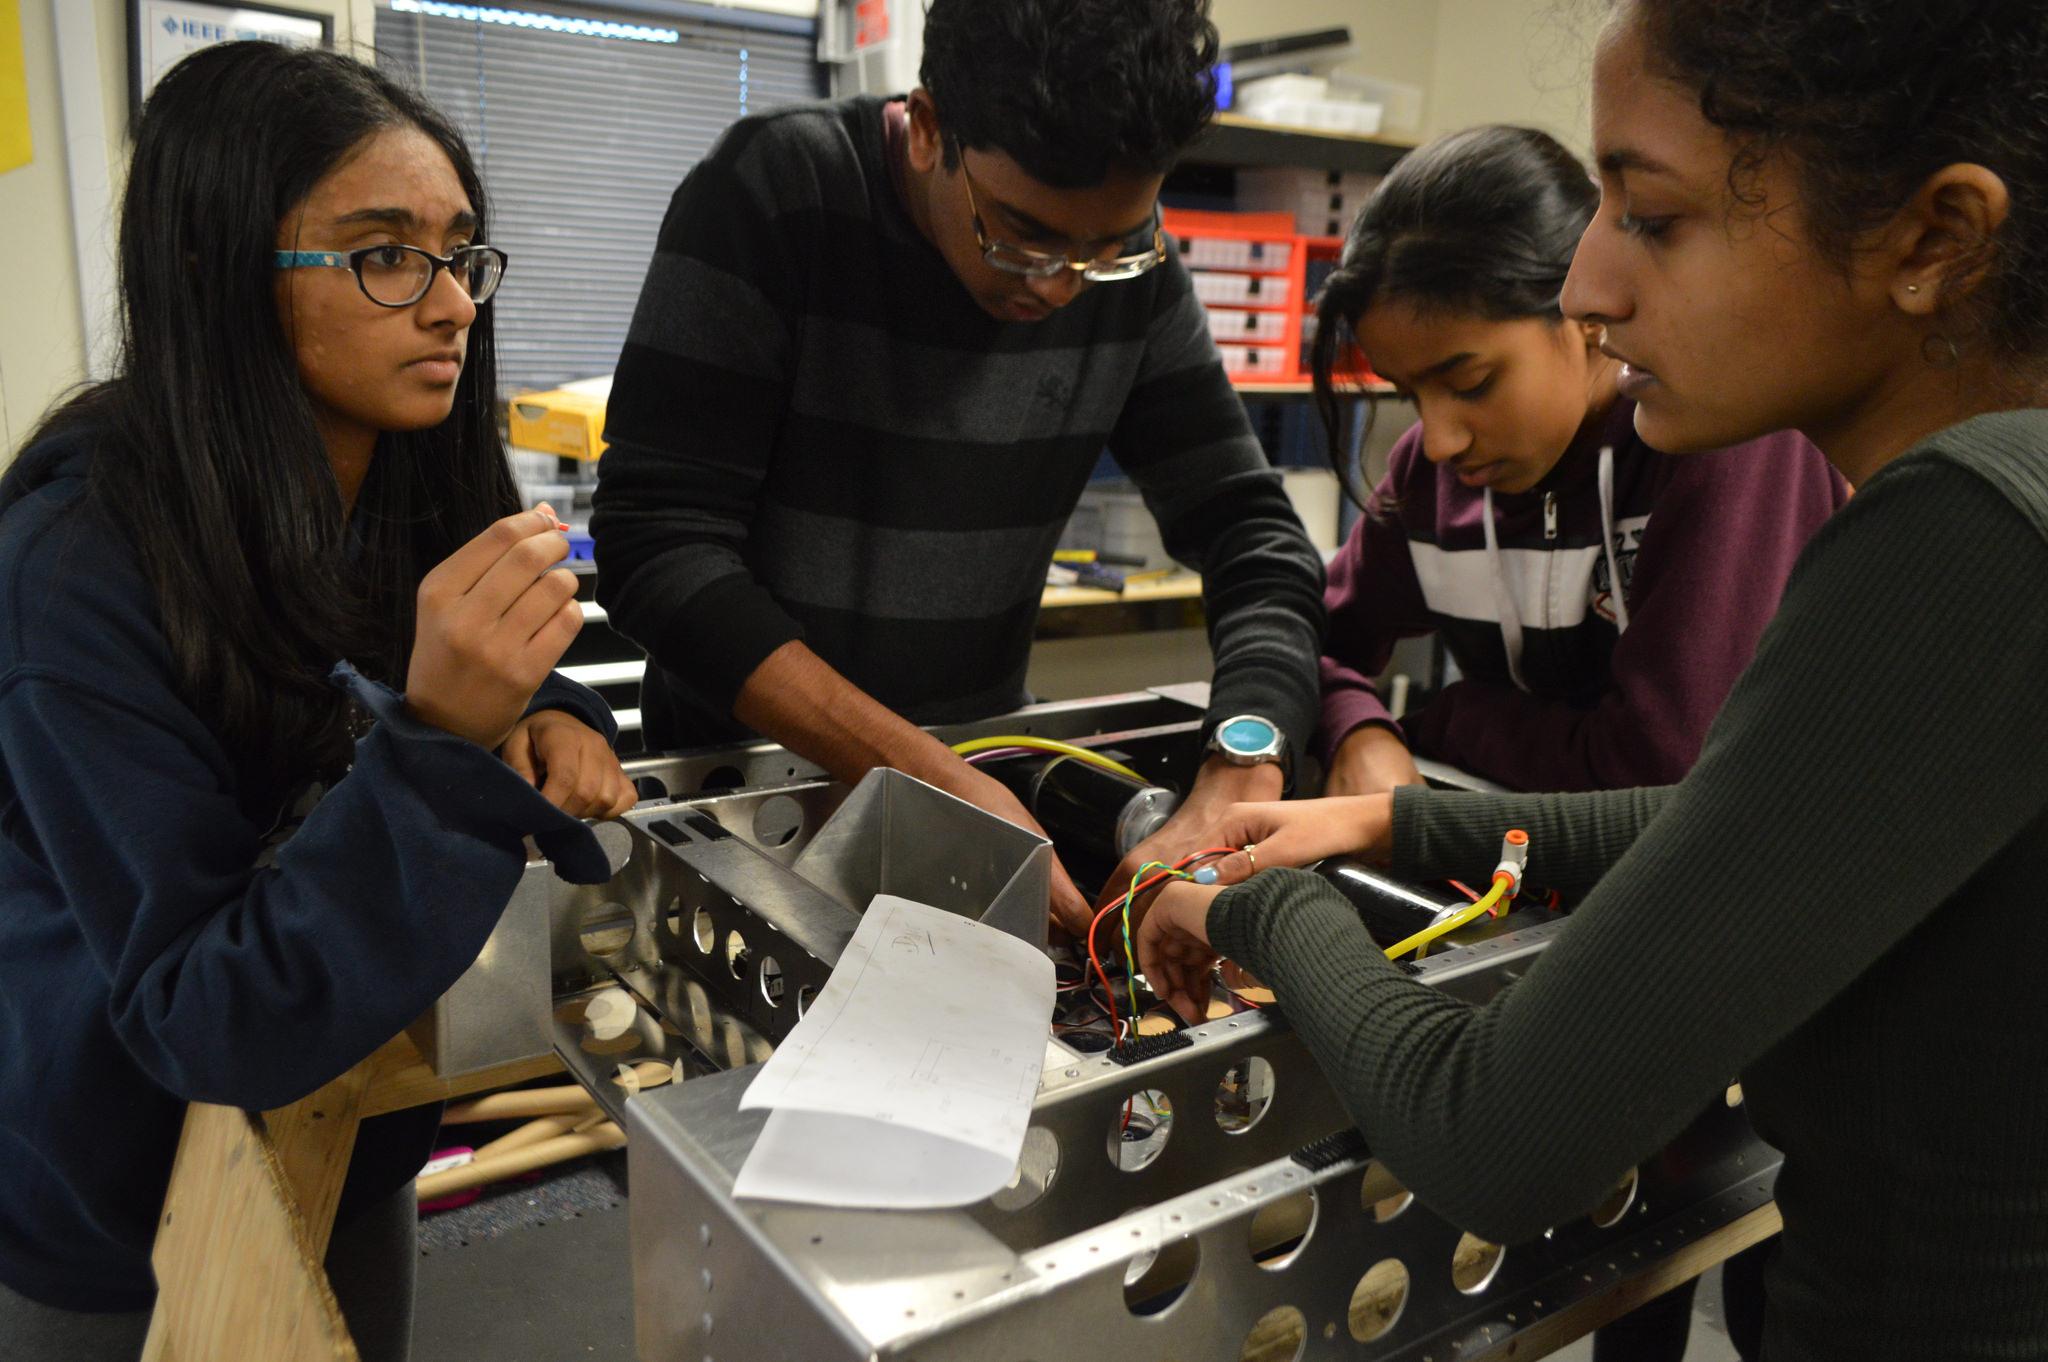 Palla works with three female members to adjust components of the robot. This year, MVRT aims to encourage girls to participate equally throughout the build season.